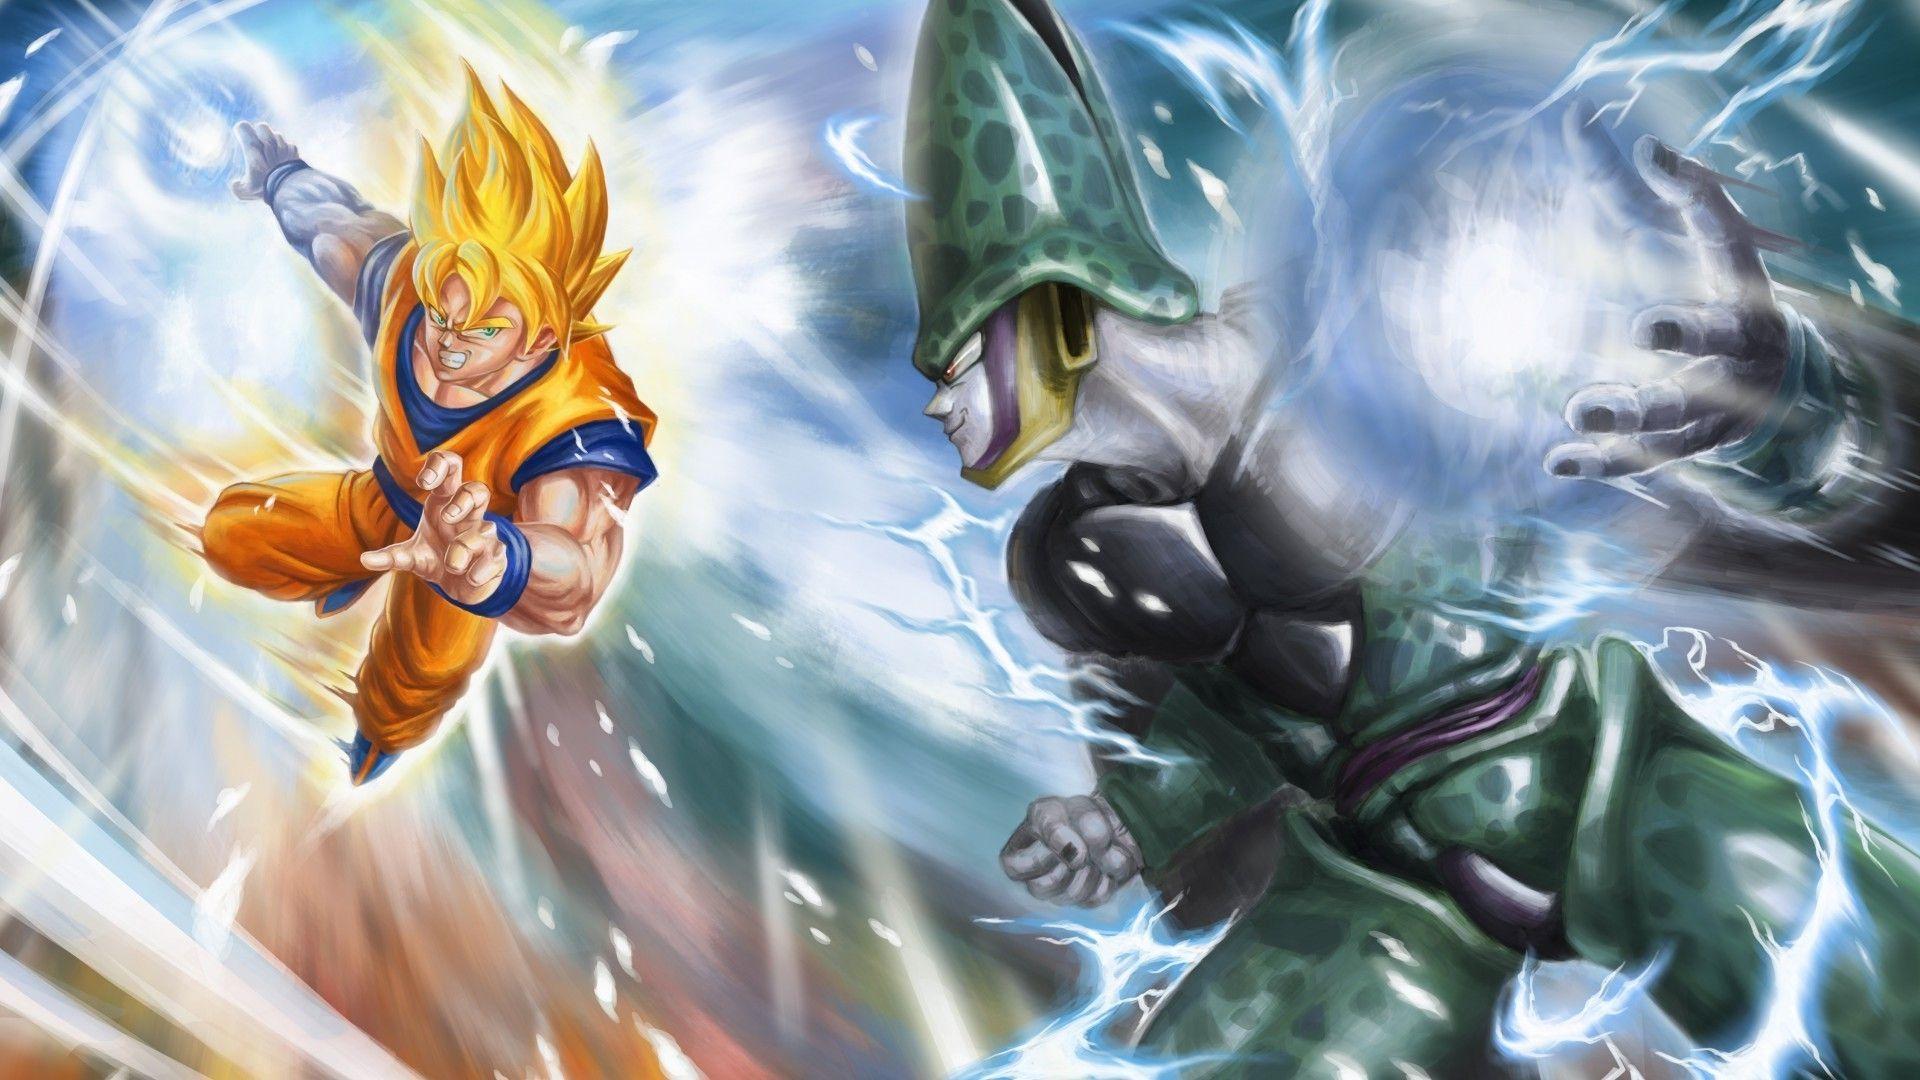 Top goku vs cell wallpaper Download Book Source for free download HD, 4K & high quality wallpaper